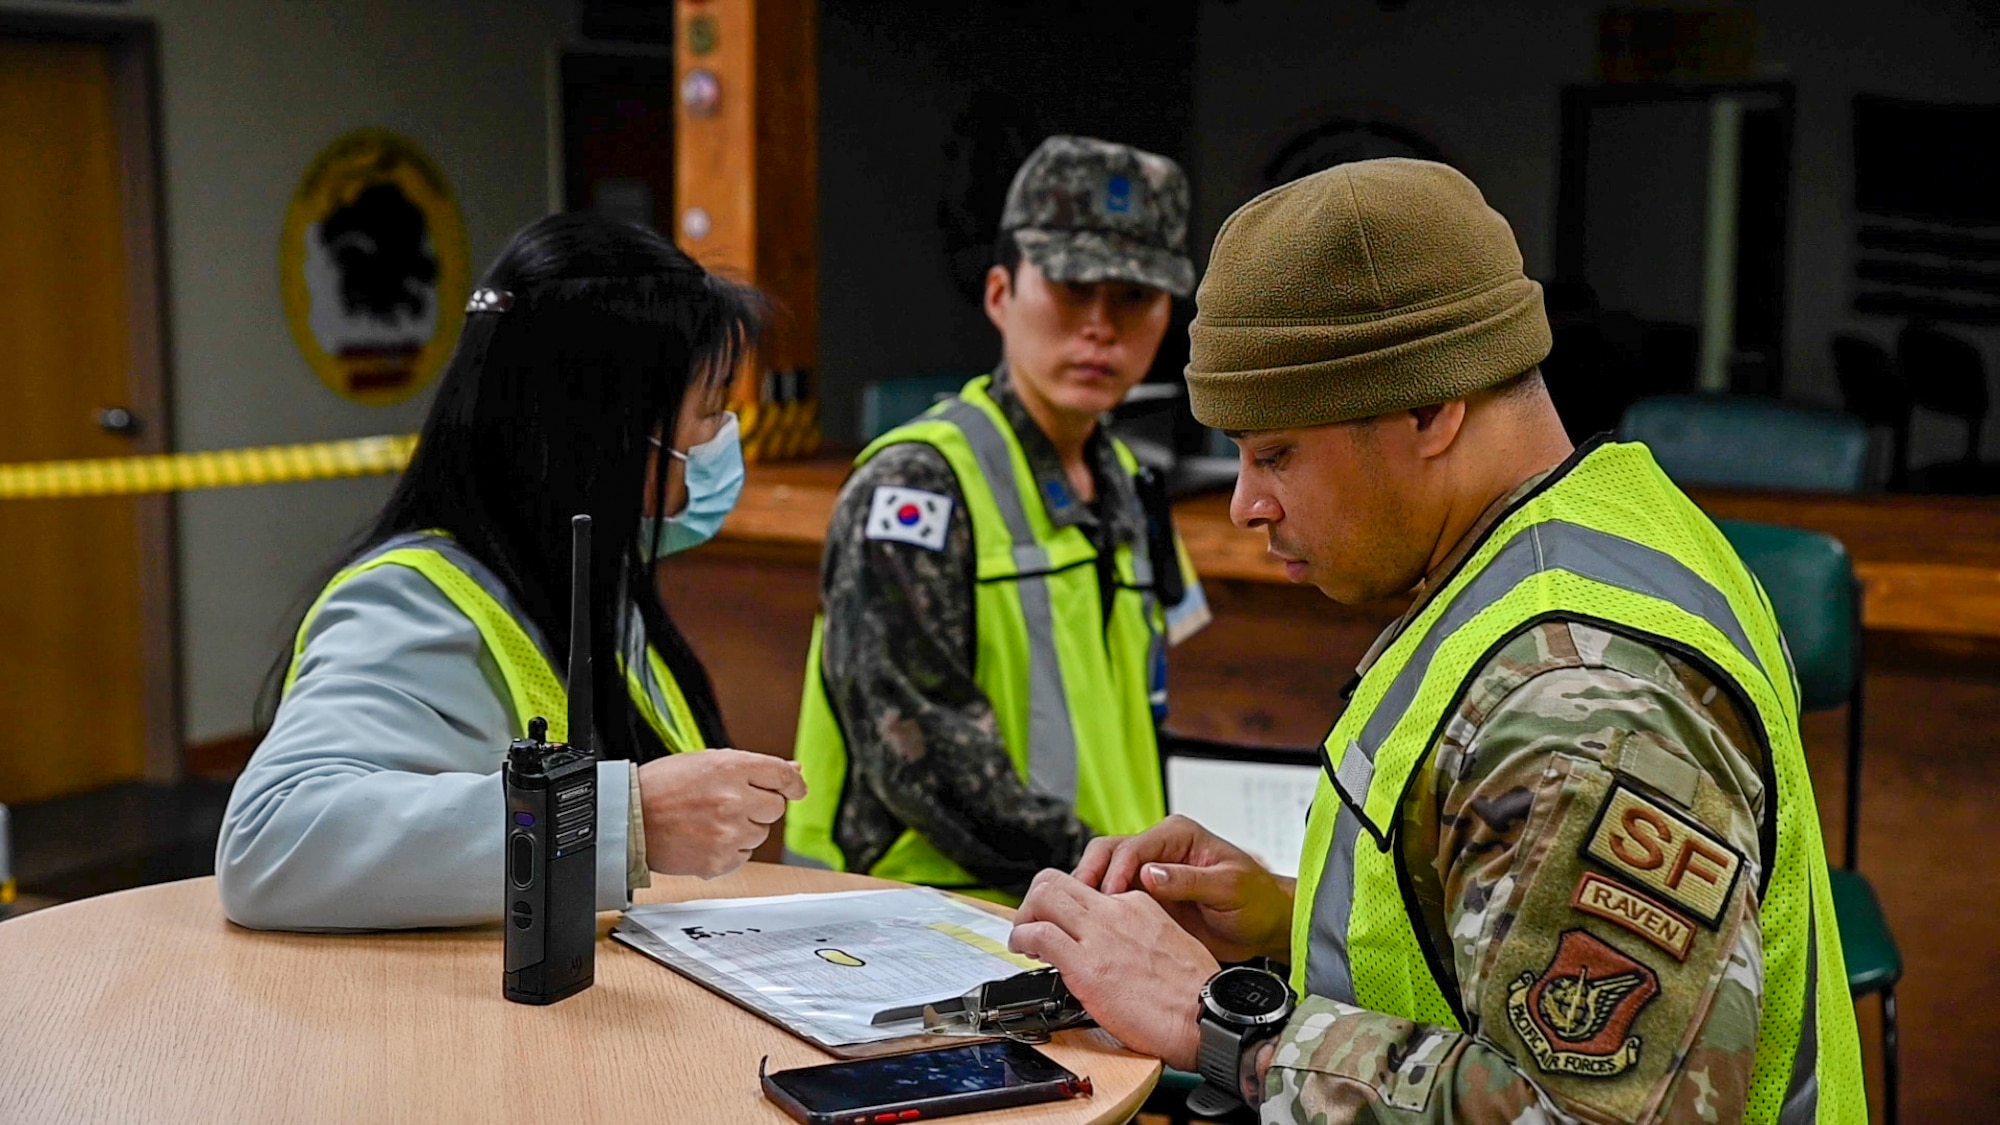 U.S. Air Force Tech Sgt. Charles Bowman Jr., 607th Materiel Maintenance Squadron anti-terrorism program manager, reviews charts with fellow evaluators during an active shooter training event at Daegu Air Base, Republic of Korea, April 24, 2023. During the training, U.S. Air Force members partnered with ROKAF personnel to test capabilities on response and communication, ensuring they have the most efficient airtight operation possible during an active shooter response. (U.S. Air Force photo by Senior Airman Trevor Gordnier)